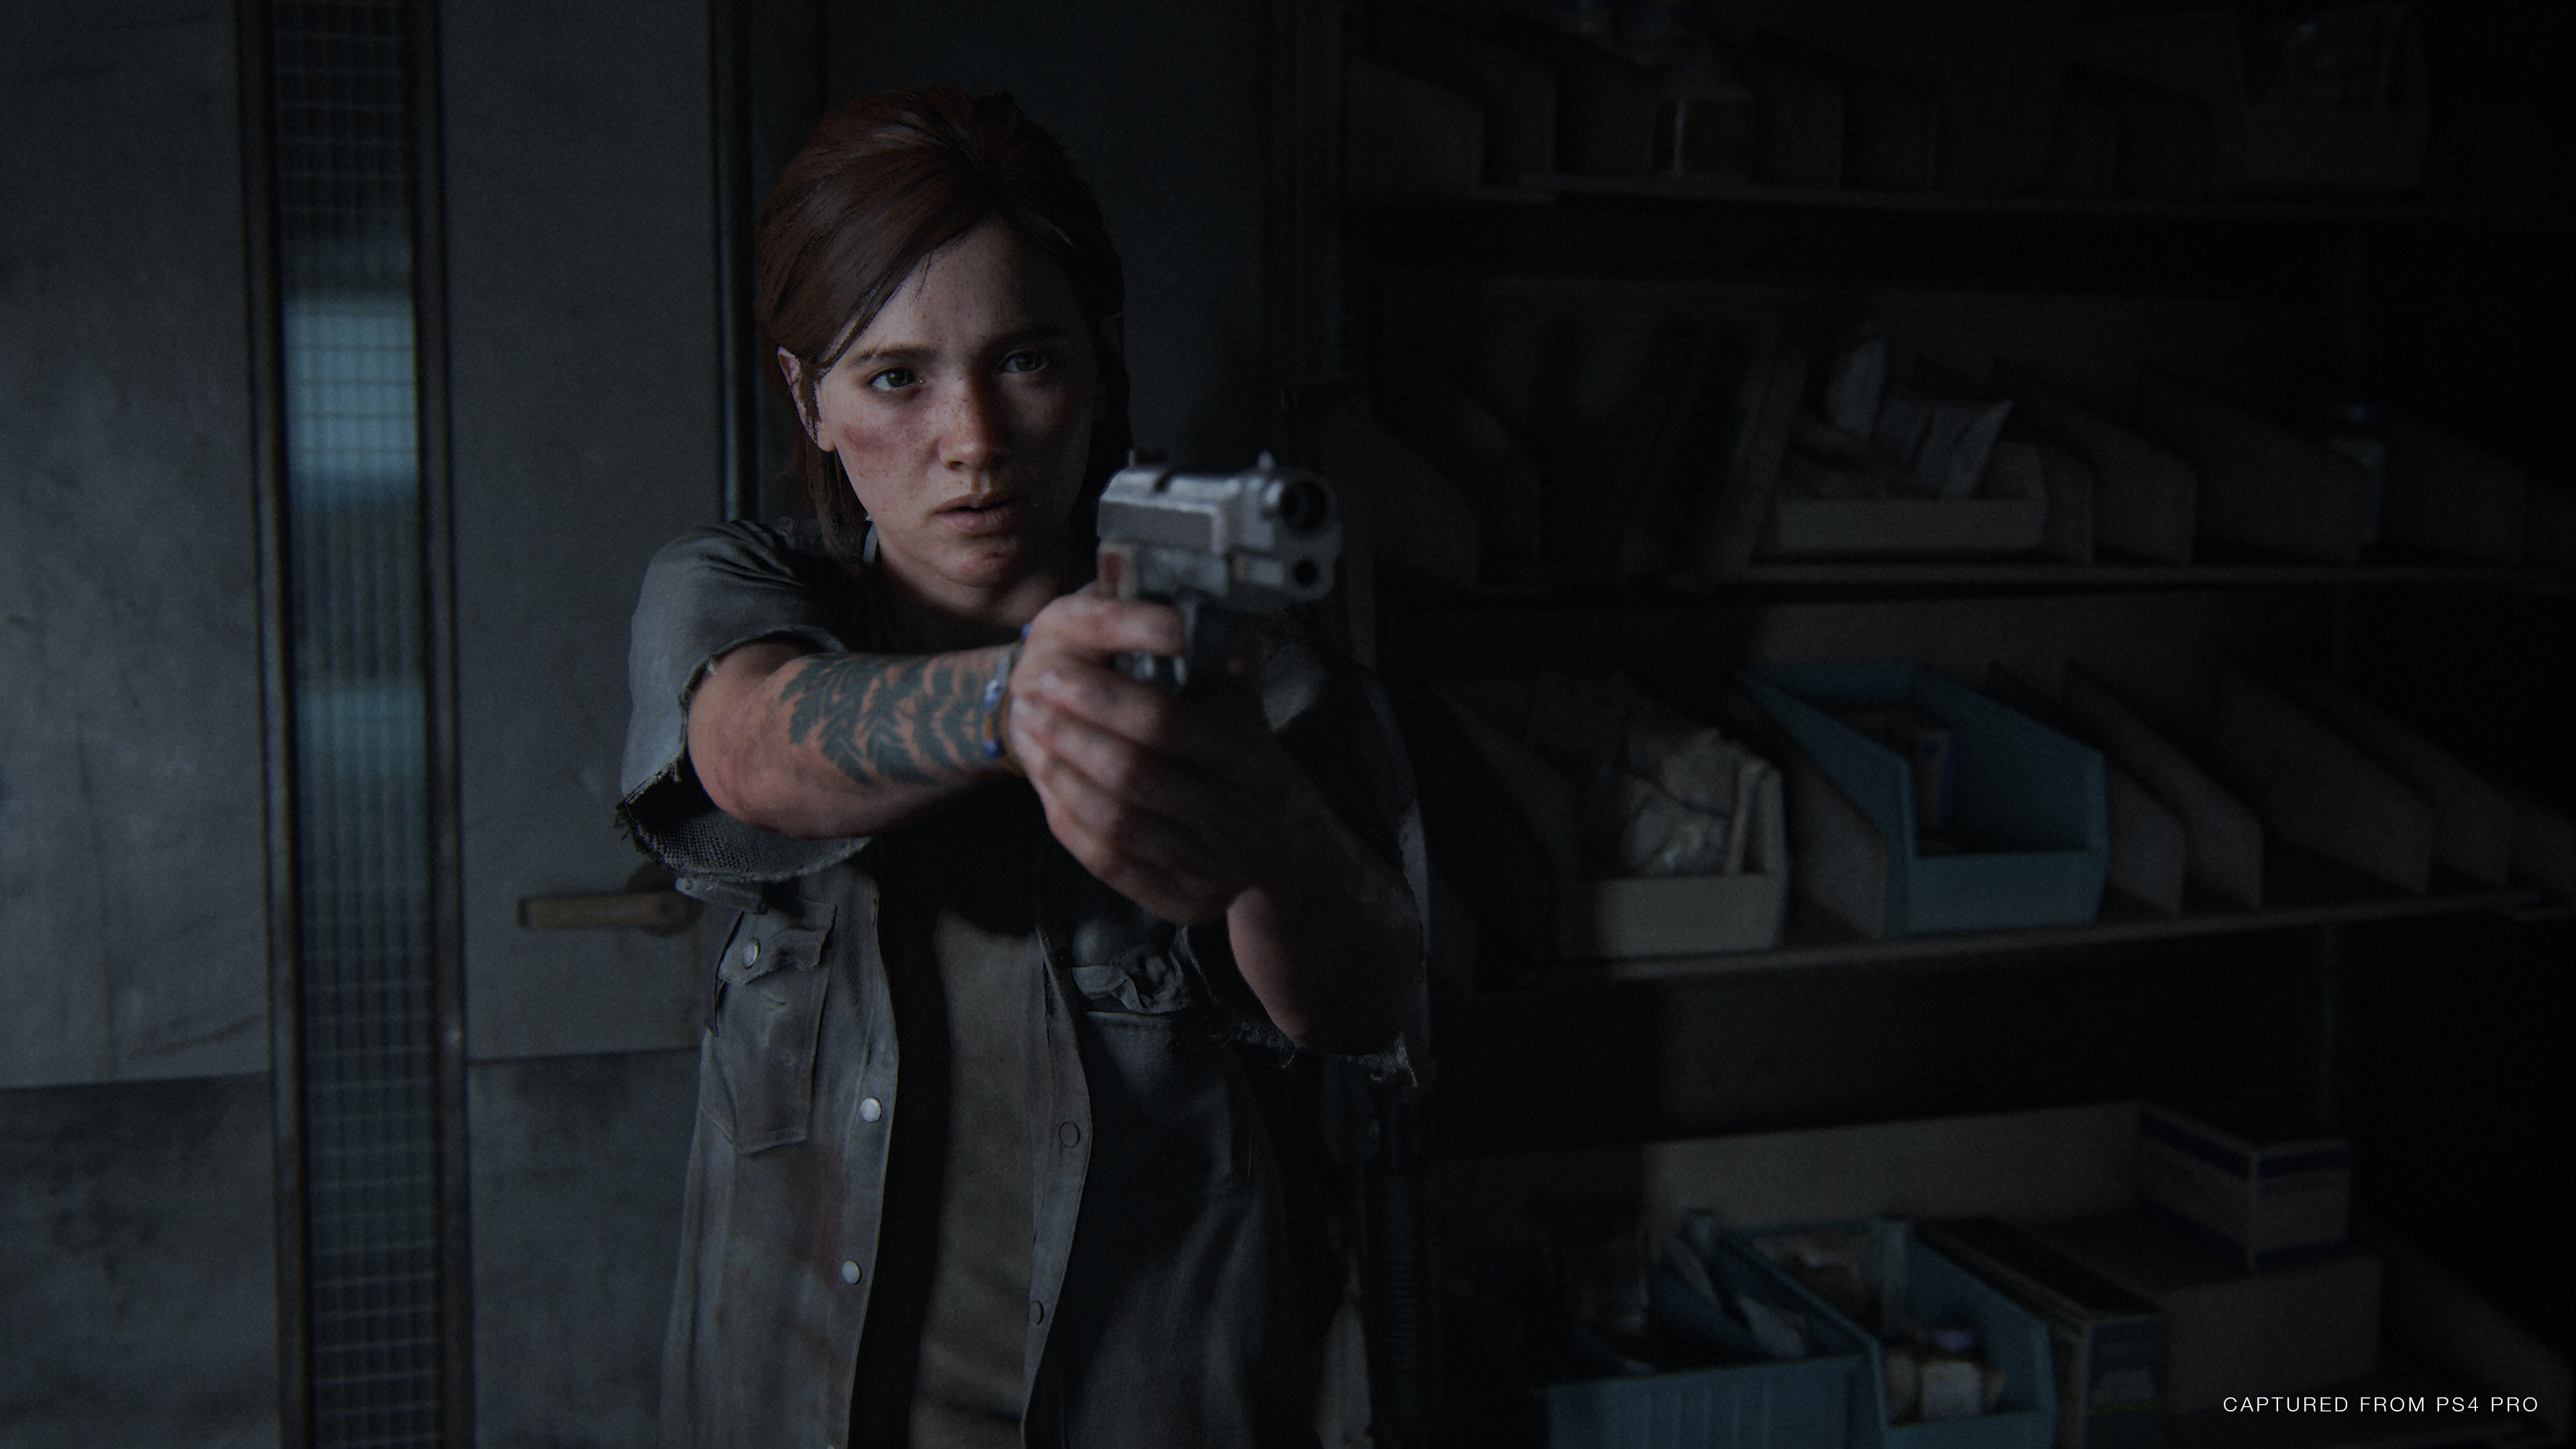 The Last of Us 3 could happen, but developer Naughty Dog is